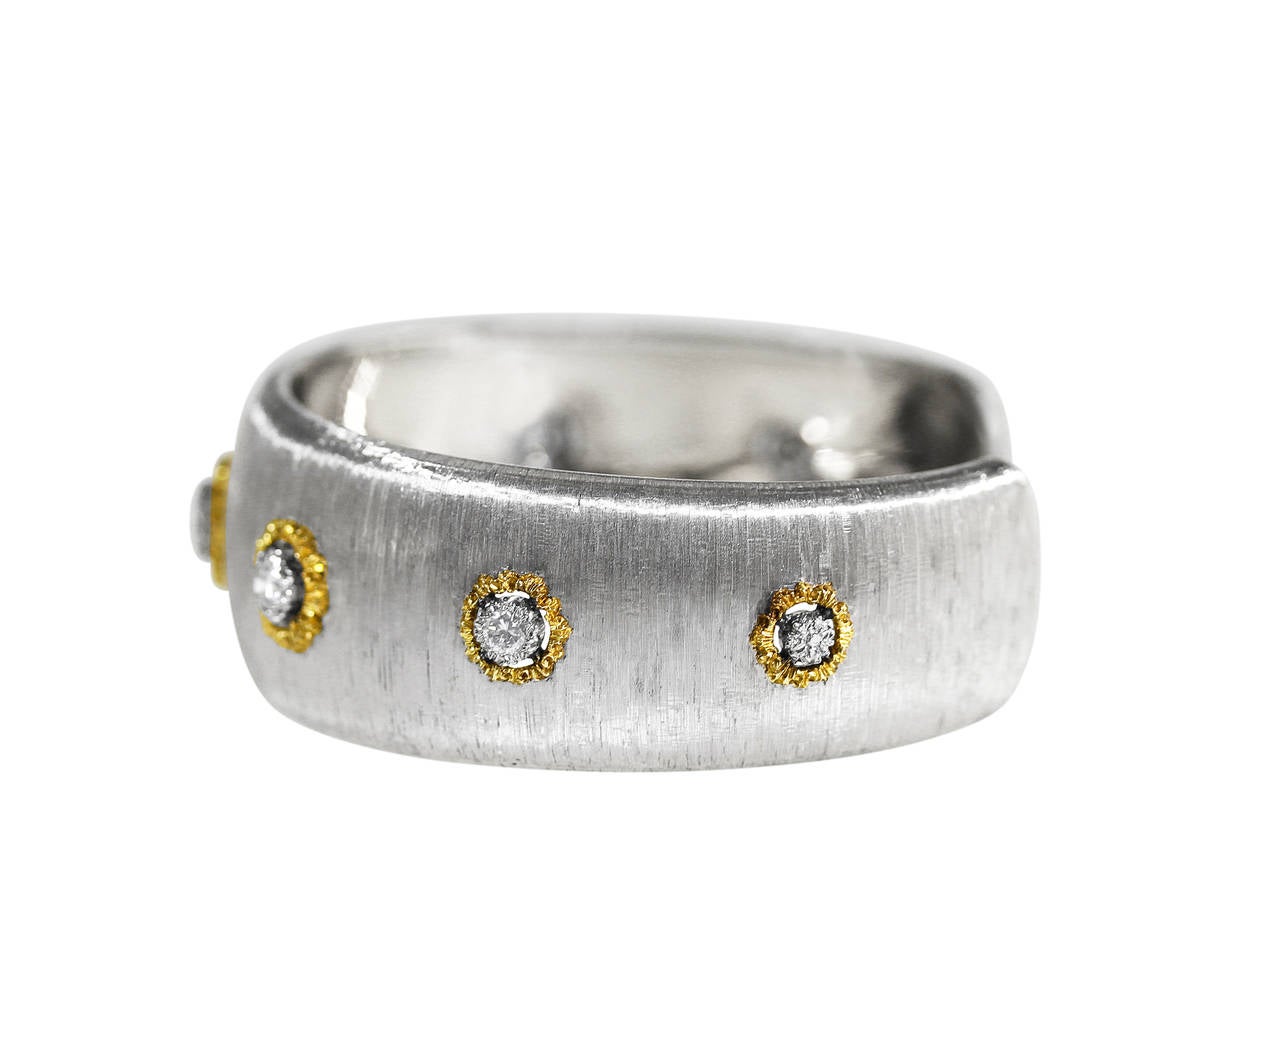 An 18 karat white and yellow gold and diamond bangle bracelet by Buccellati, Italy, the slightly tapered band of brushed white gold accented by graduated yellow gold plaques set with 5 round diamonds weighing approximately 1.00 carat, gross weight